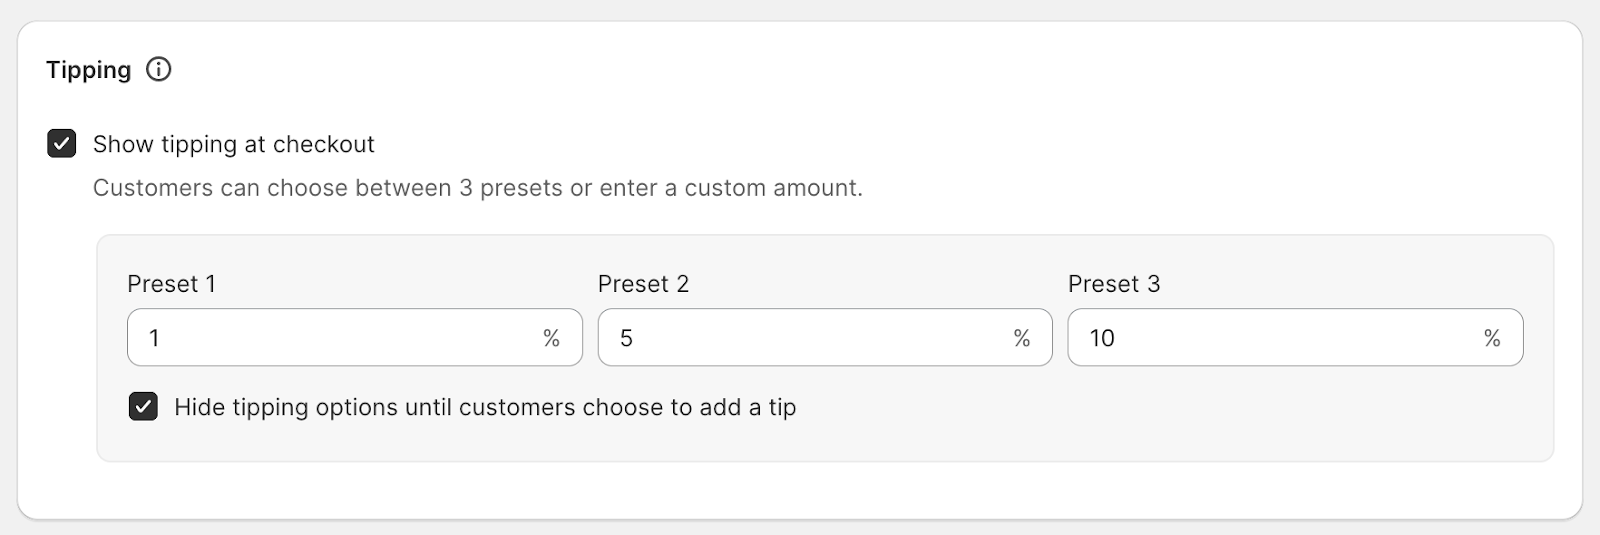 Screenshot the shows a small window that reads "Tipping" at the top. There is a checked option box that reads "Show tipping at checkout. Customers can choose between 3 presets or enter a custom amount." There are three sections where the admin can decide the three preset options for how much a customer can donate. The shown presets are one percent, five percent, and ten percent. There is a checked option box at the bottom of the image that reads "Hide tipping options until customers choose to add a tip"